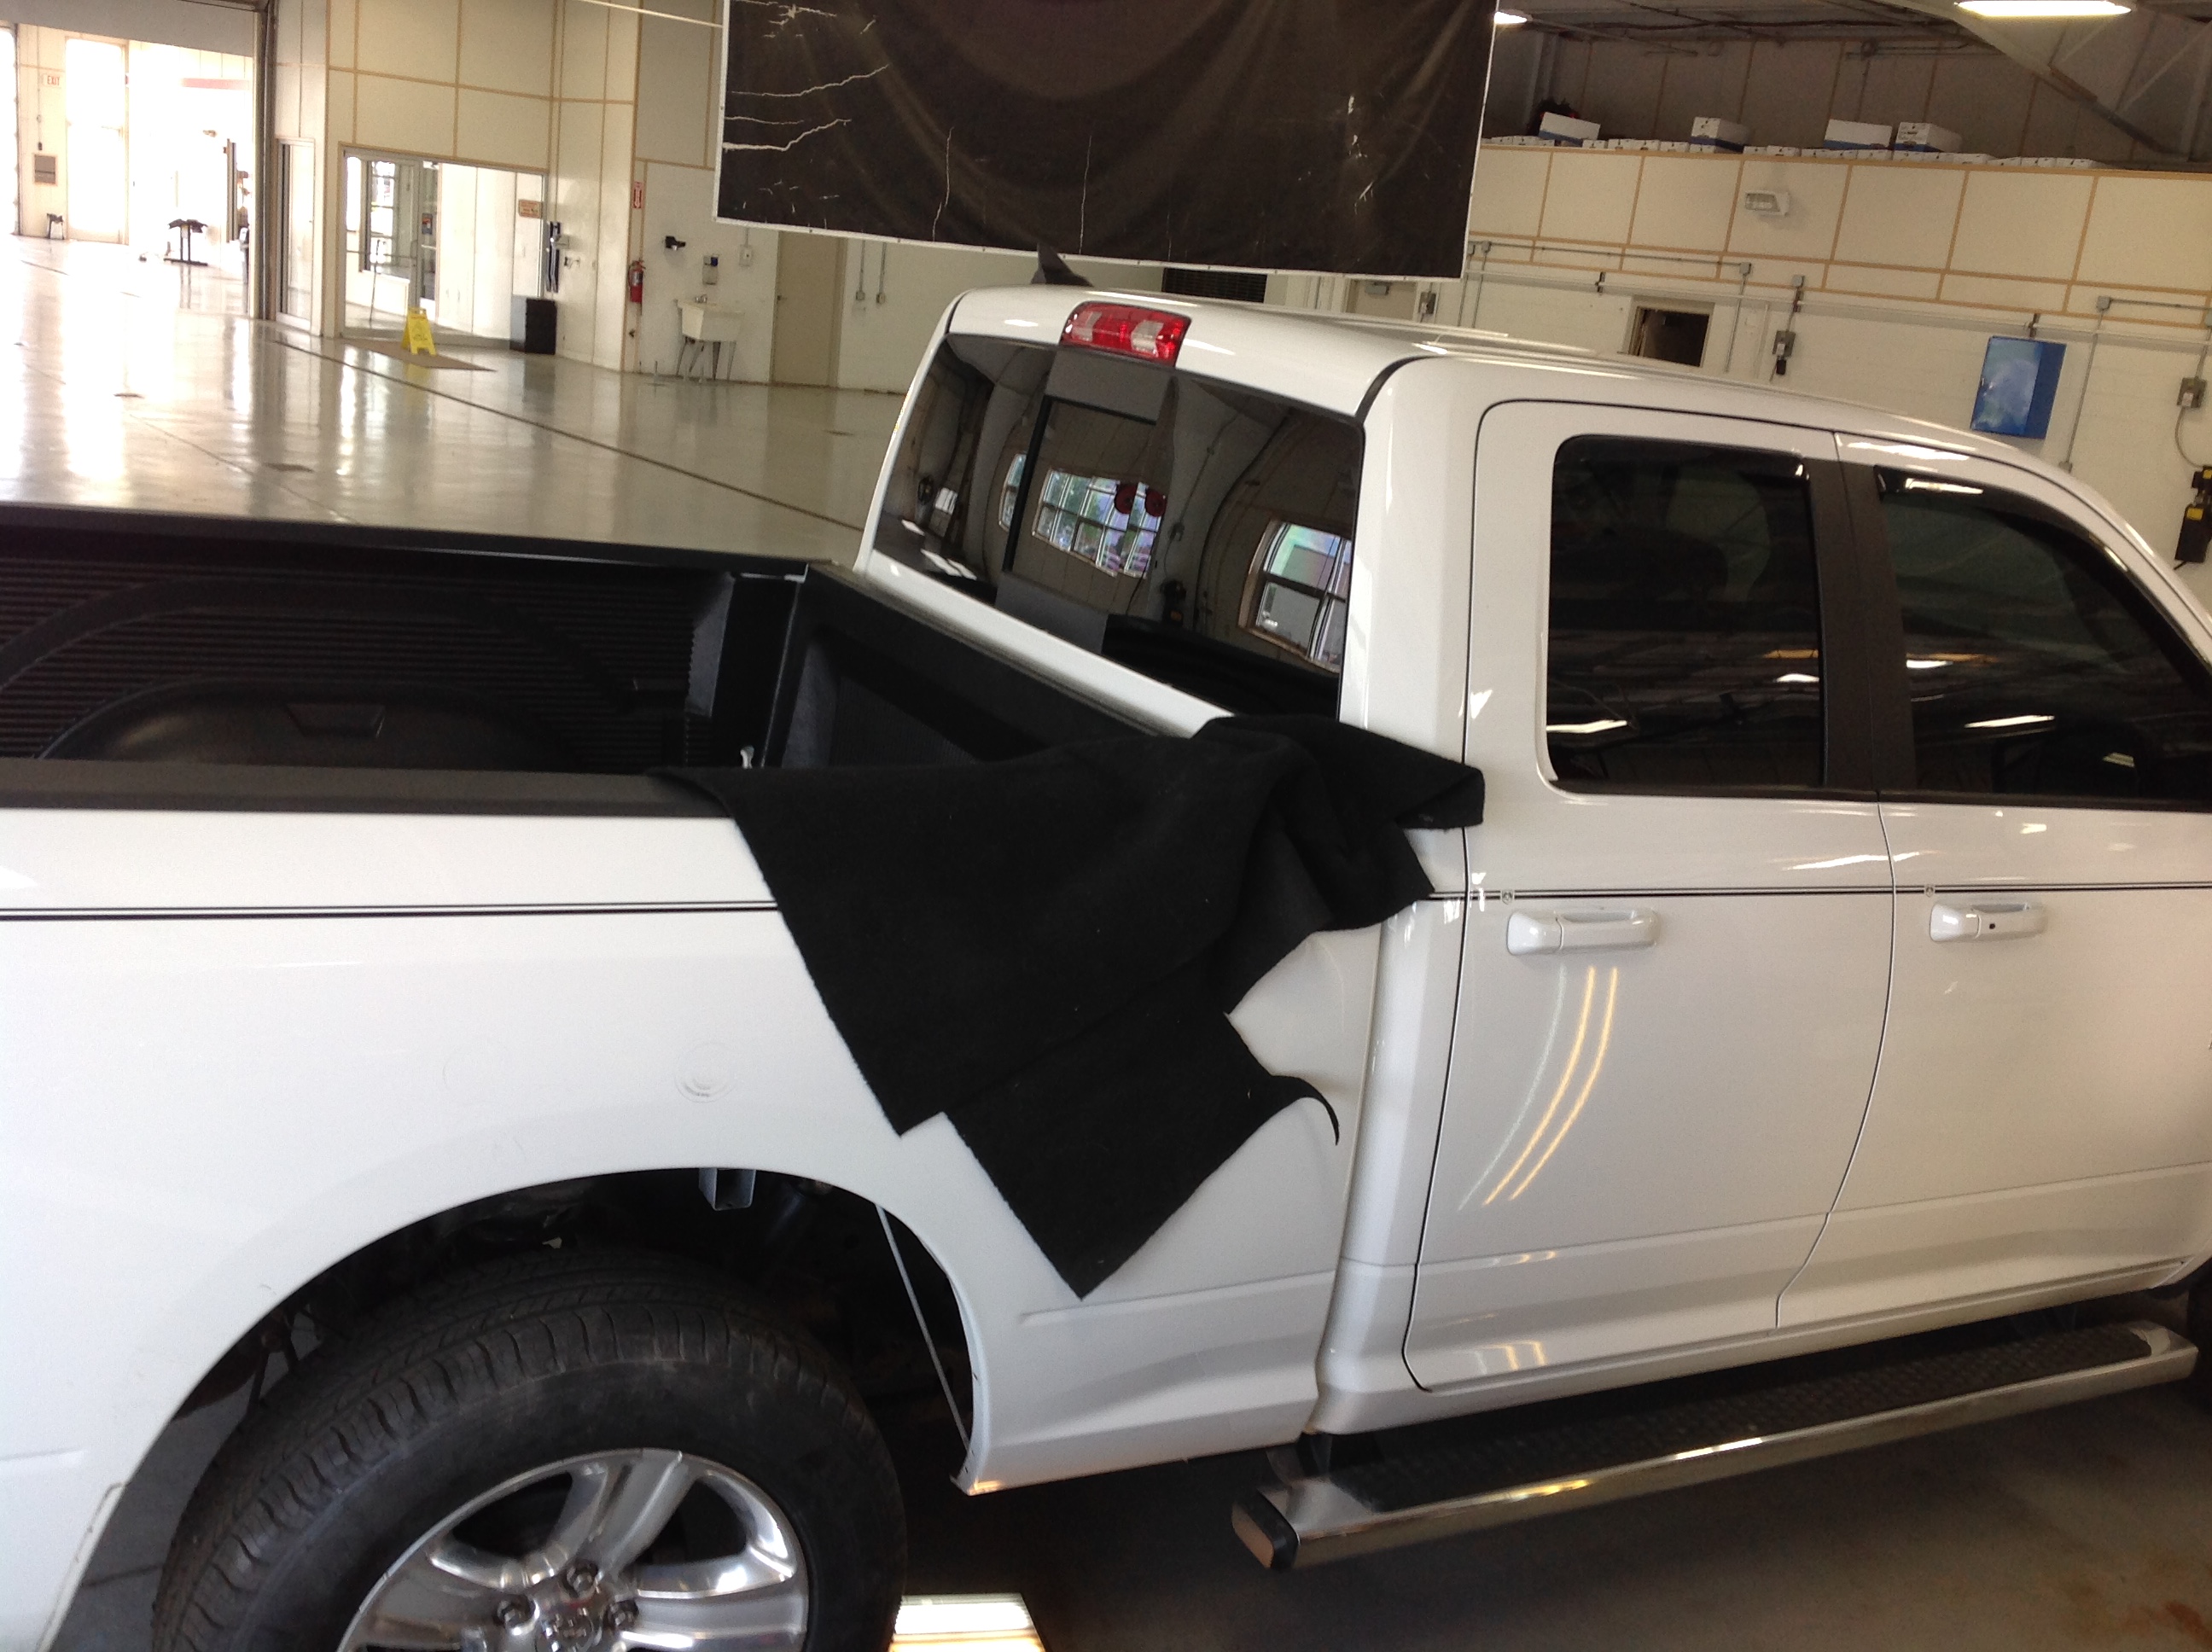 2014 White Ram 1500. removal of rear inner wheel well. For Pdr access. For more information about "paintless dent removal" contact Michael Bocek at 217dent.com.